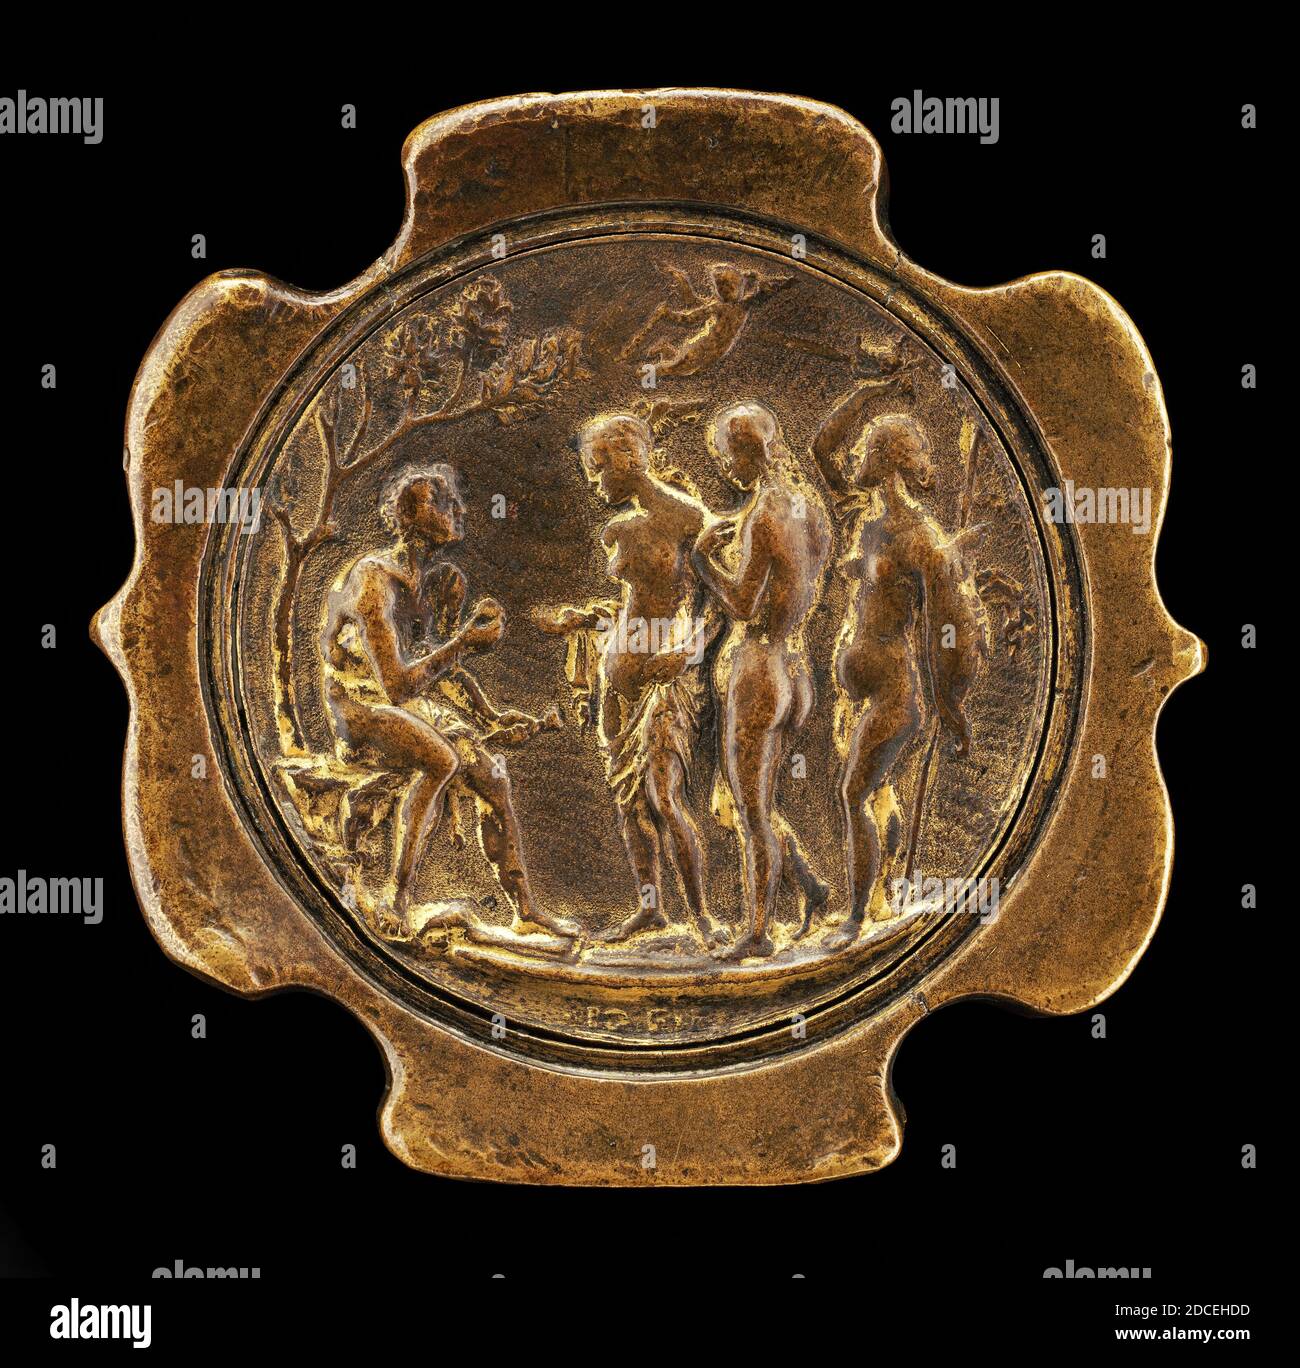 Master IO.F.F., (artist), Bolognese, active 1468/1484, Sword Pommel with inset plaquette of The Judgment of Paris, second half 15th century, bronze, overall (diameter of plaquette alone): 5.37 cm (2 1/8 in.), gross weight (detachable plaquette alone): 28.5 gr (0.063 lb.), overall (sword pommel): 7.05 × 7.27 × 1.63 cm (2 3/4 × 2 7/8 × 5/8 in Stock Photo